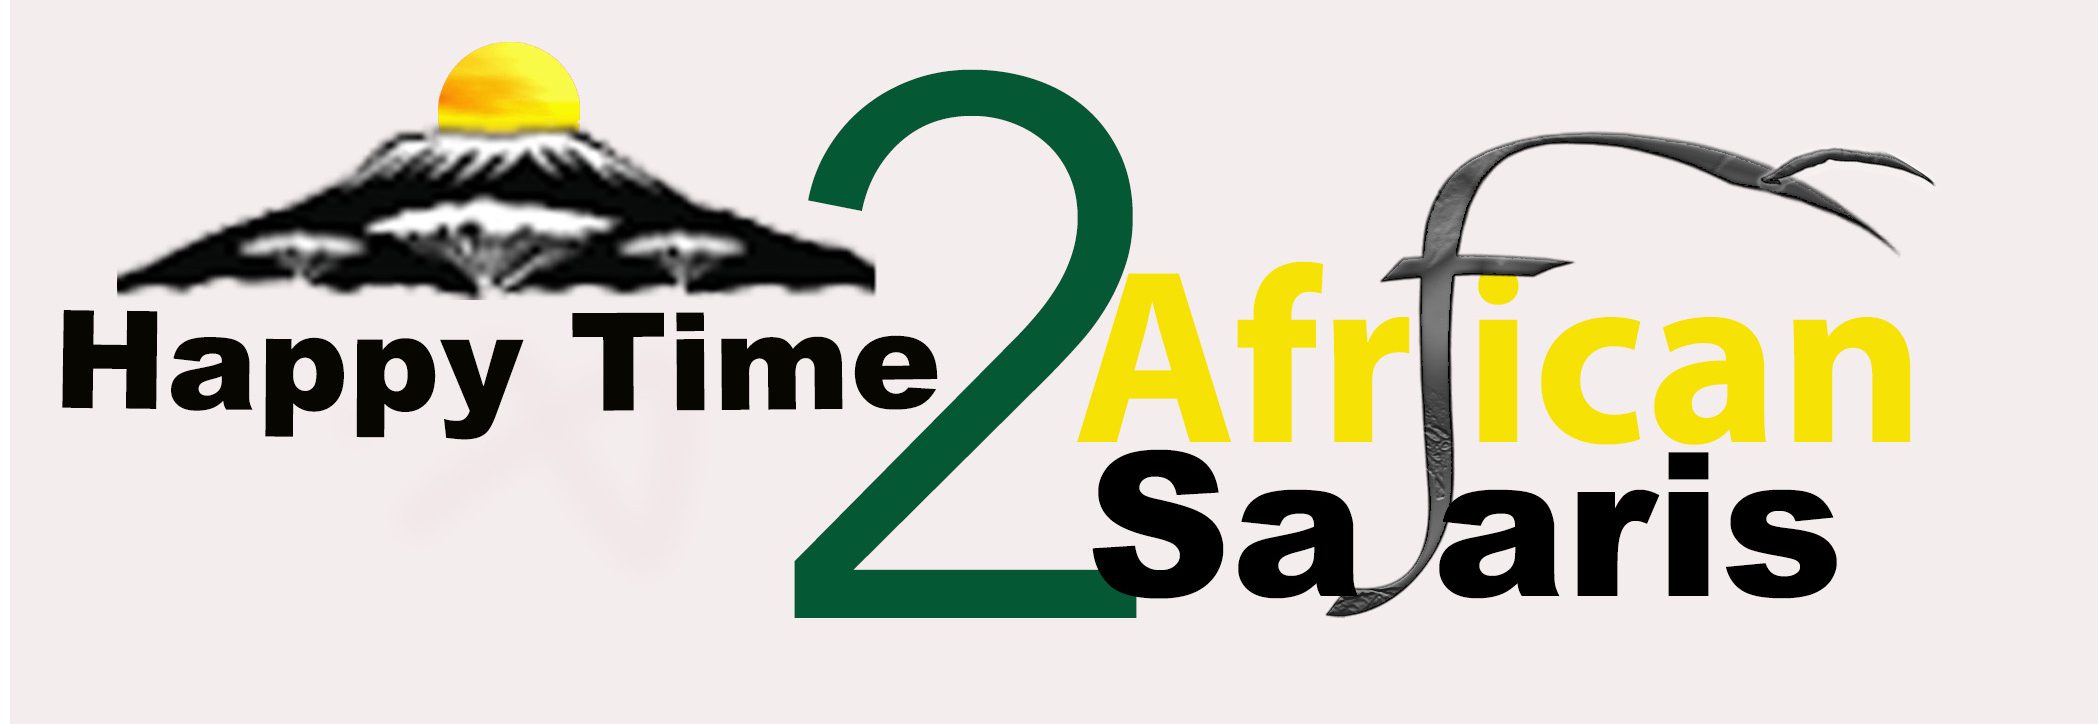 Happy Time2African Safaris